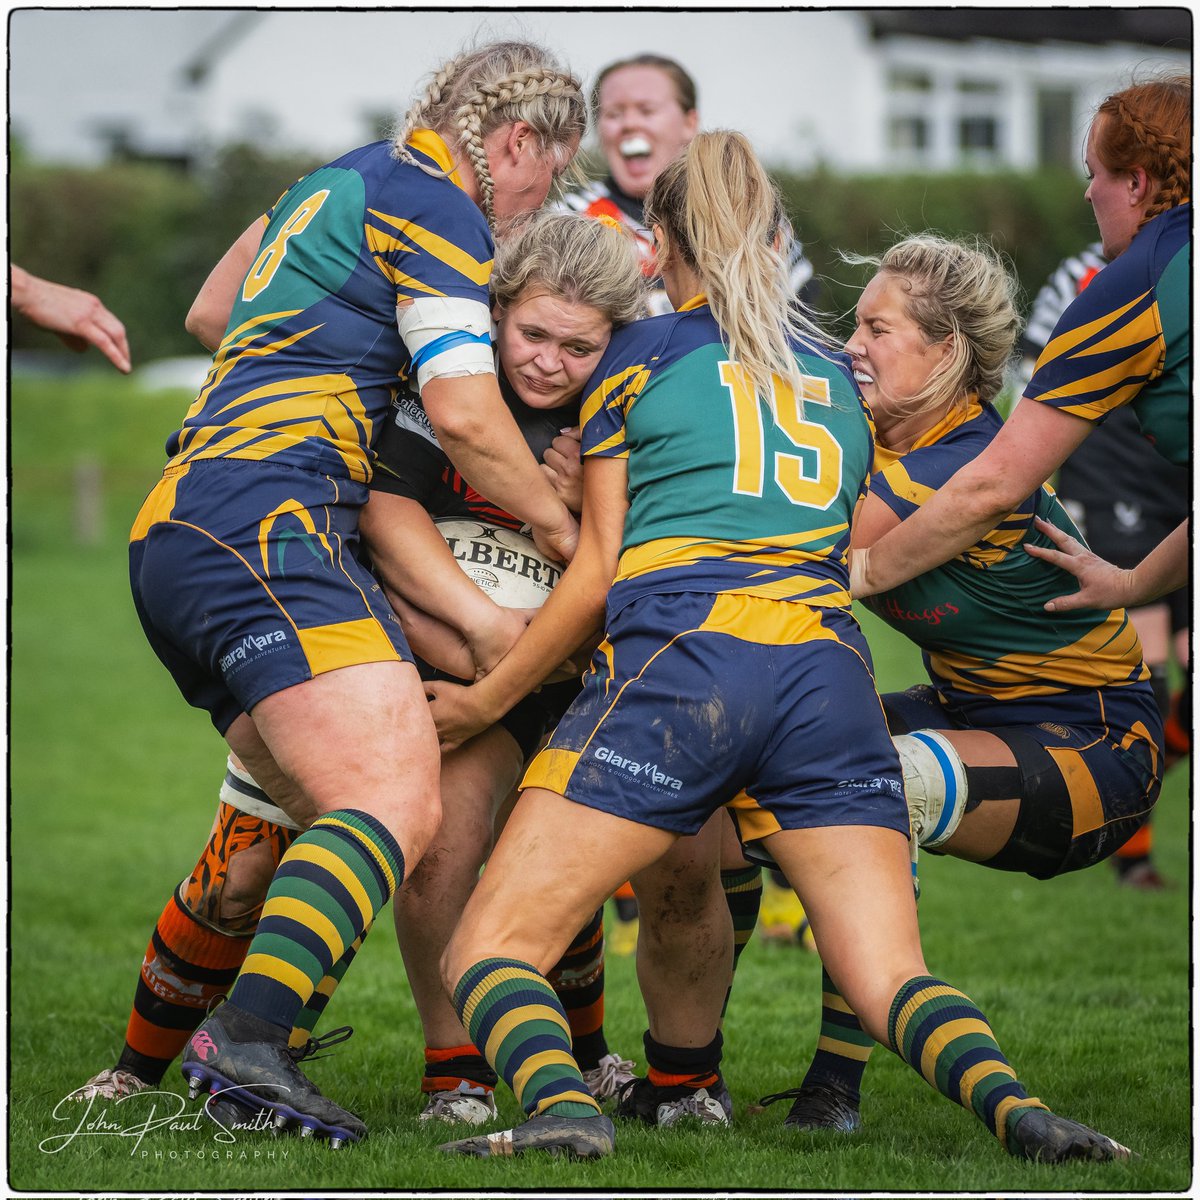 Another one from yesterday's @WorkingtonWRUFC cup match @KeswickRugby #grassrootsrugby #womensrugby #rugbyunion @bbccumbriasport